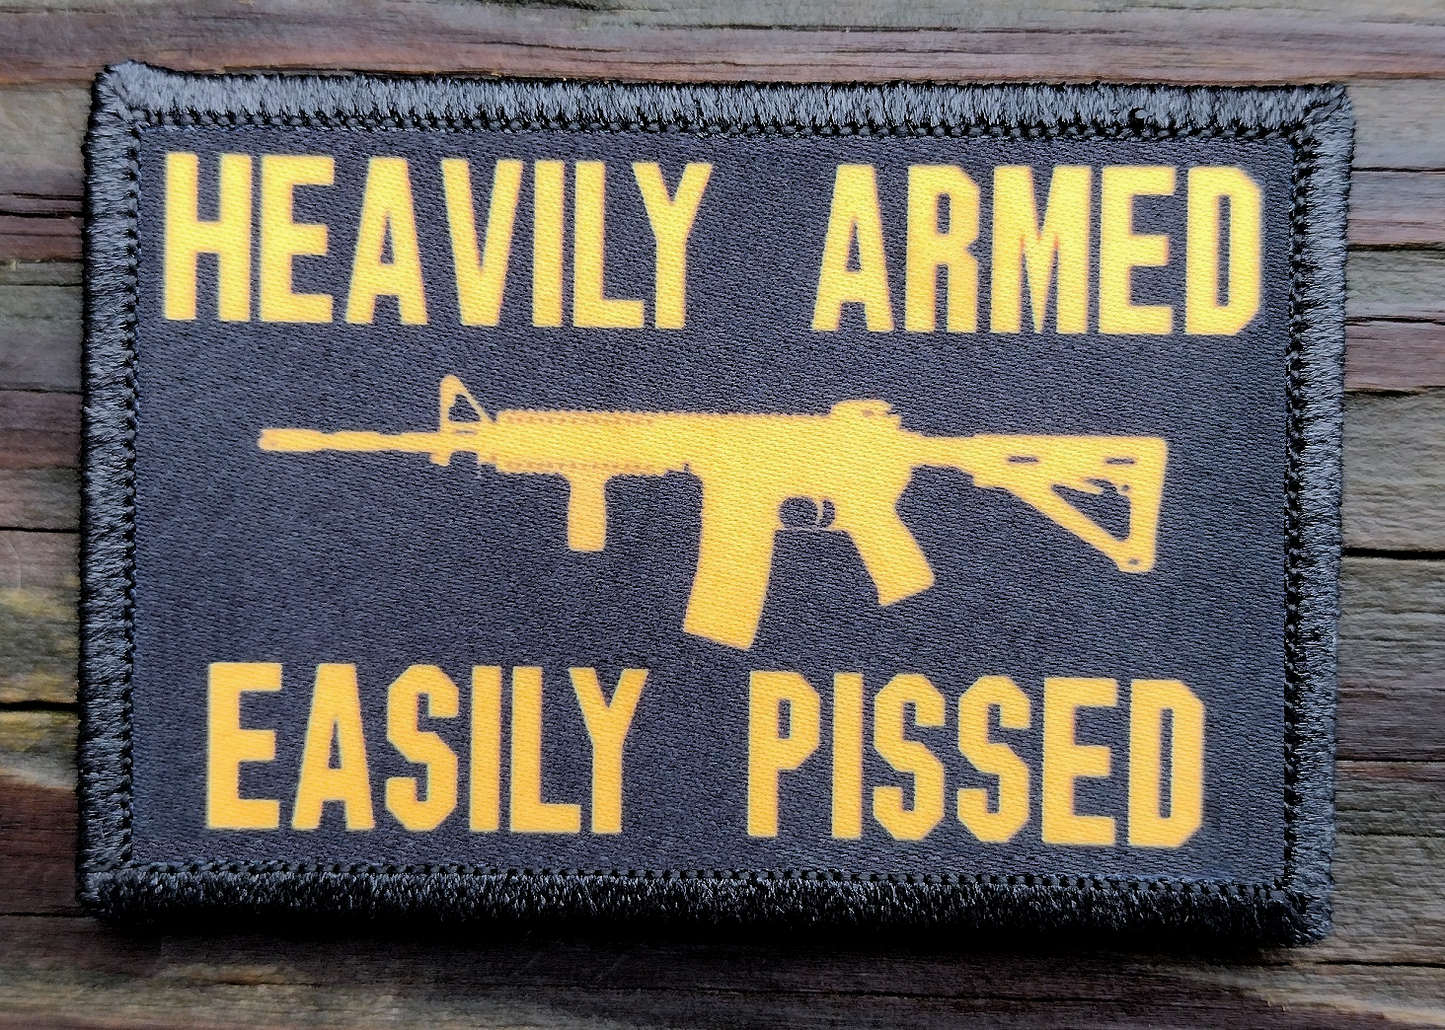 Heavily Armed Easily Pissed Morale Patch